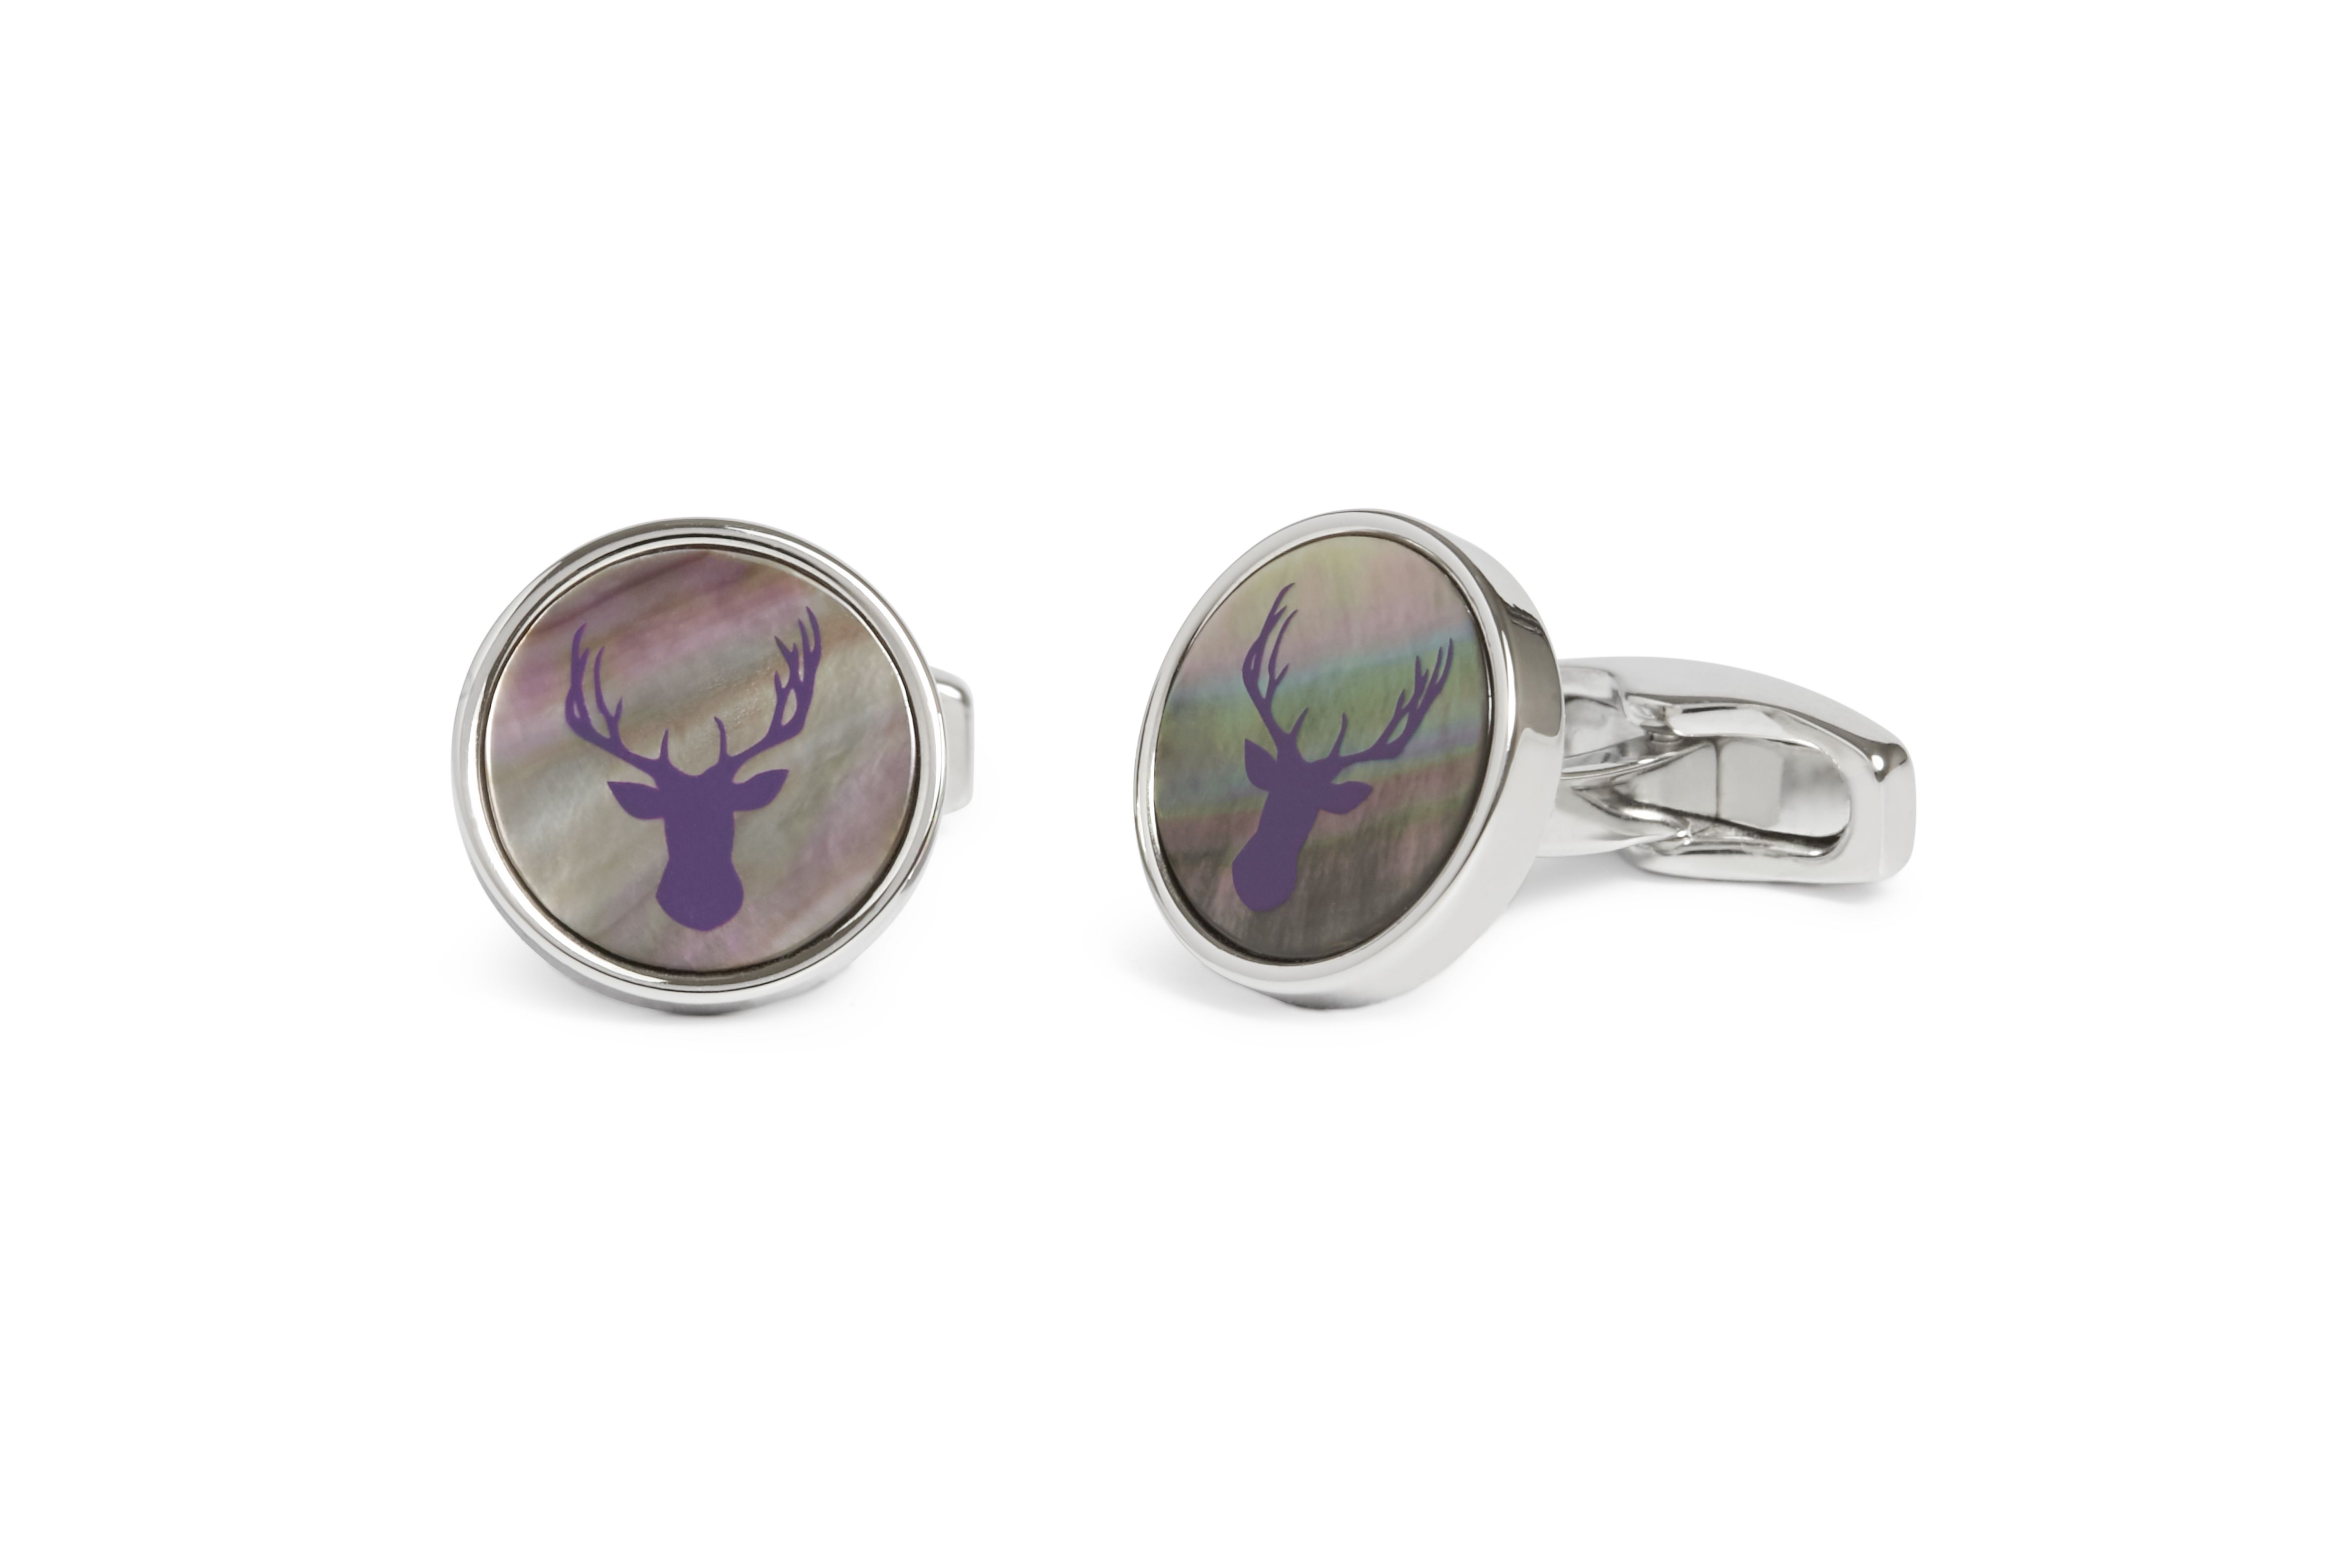 A majestic stag in silhouette, ingeniously screen printed onto grey mother of pearl. Inspired by the success of my 'Pursuits Stag, cufflink this piece is designed to evoke the colours of the Scottish Highlands - the rich, multi earth-hued tones of grey mother of pearl evoke the colours of highland moors, grey granite, the muted grey/green of bog myrtle, heather in bloom, the brown flanks of rocky hills. A simple design, but very effective in its combinations.